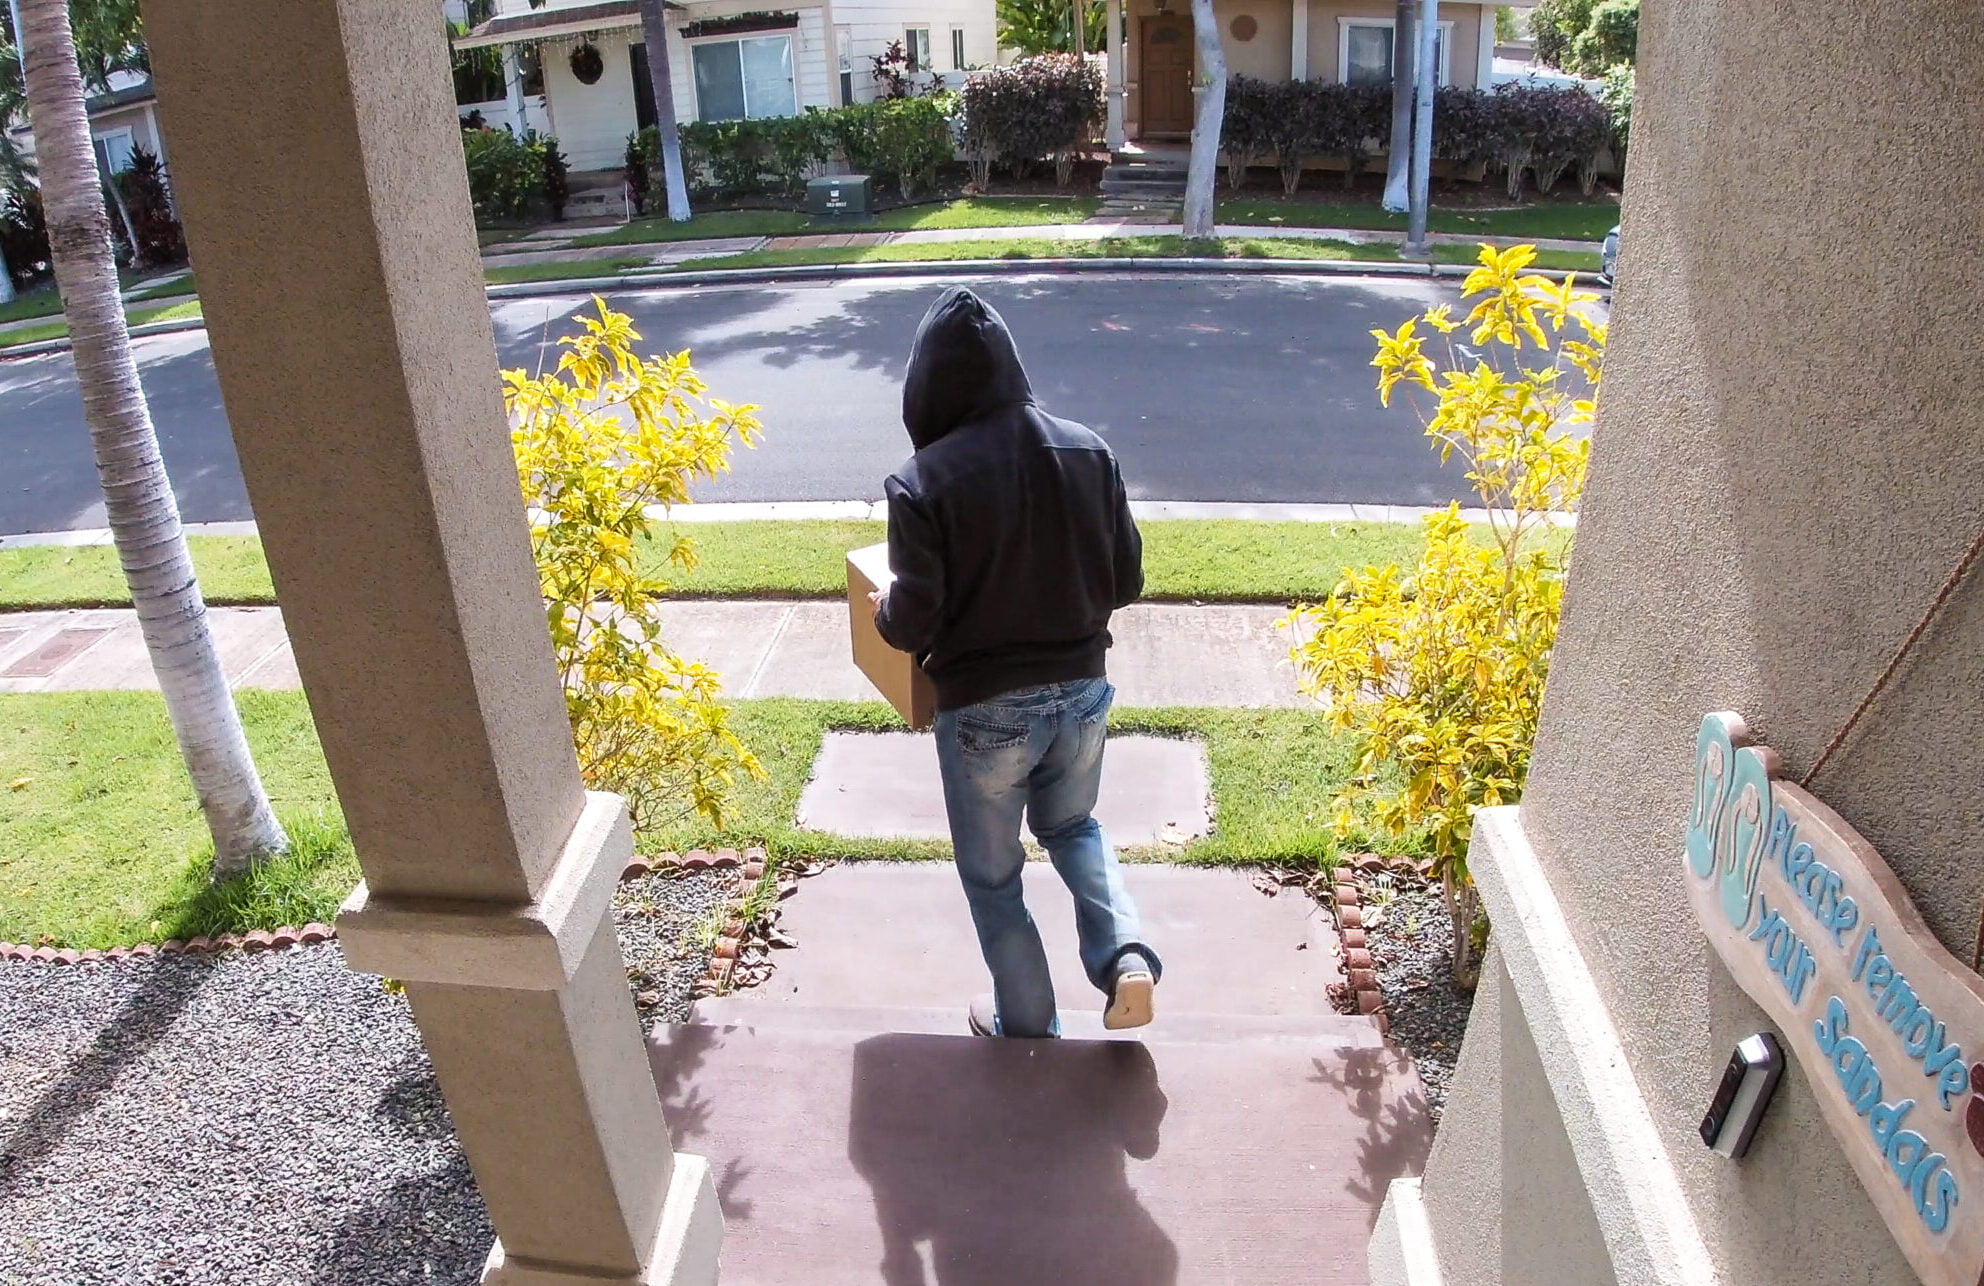 Package thief caught on video doorbell system stealing a box - porch pirates